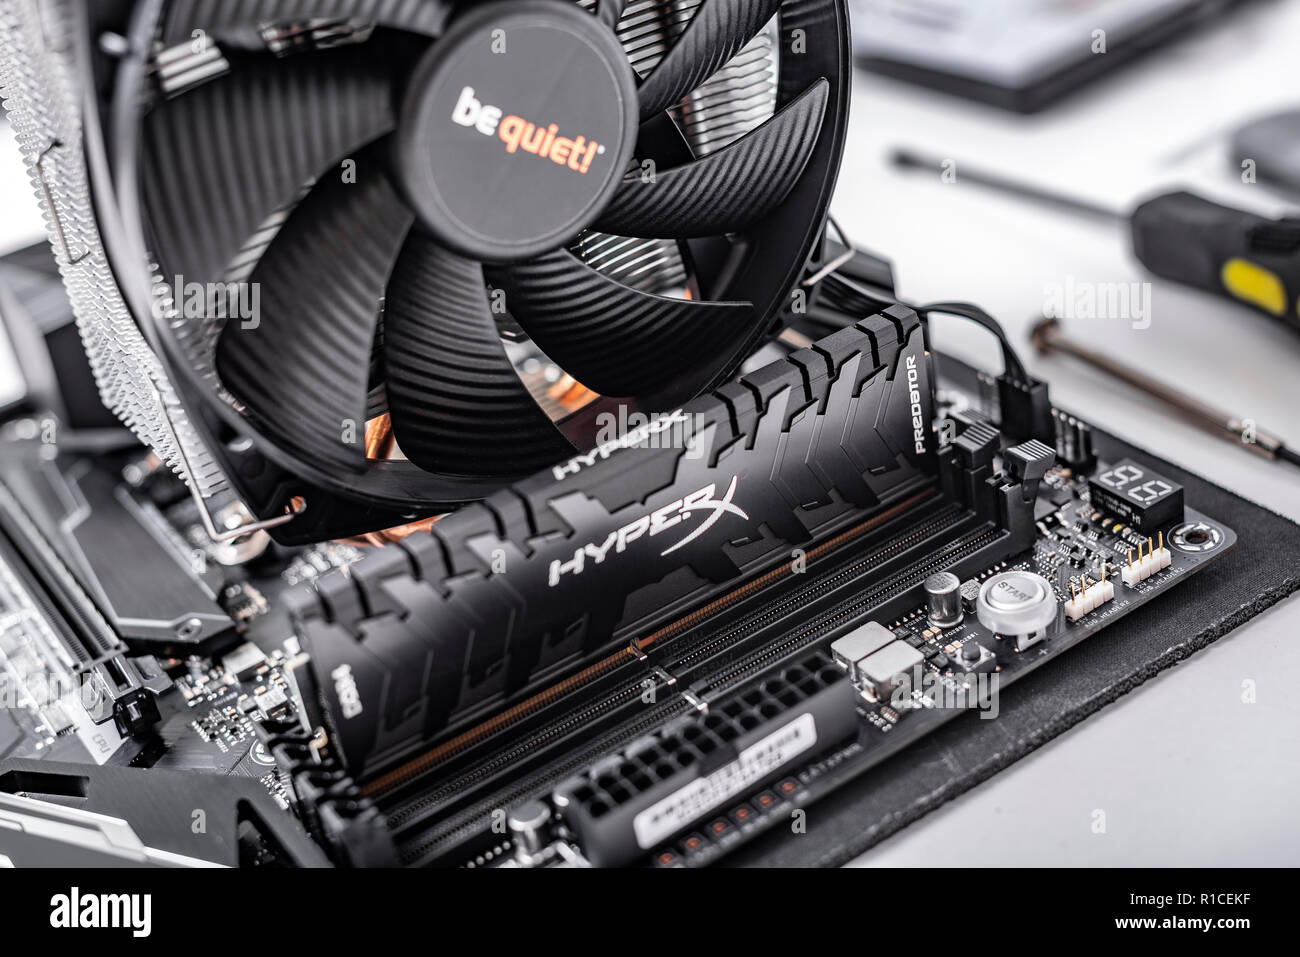 Motherboard With Installed Cooler And Ram Build A Pc Stock Photo Alamy